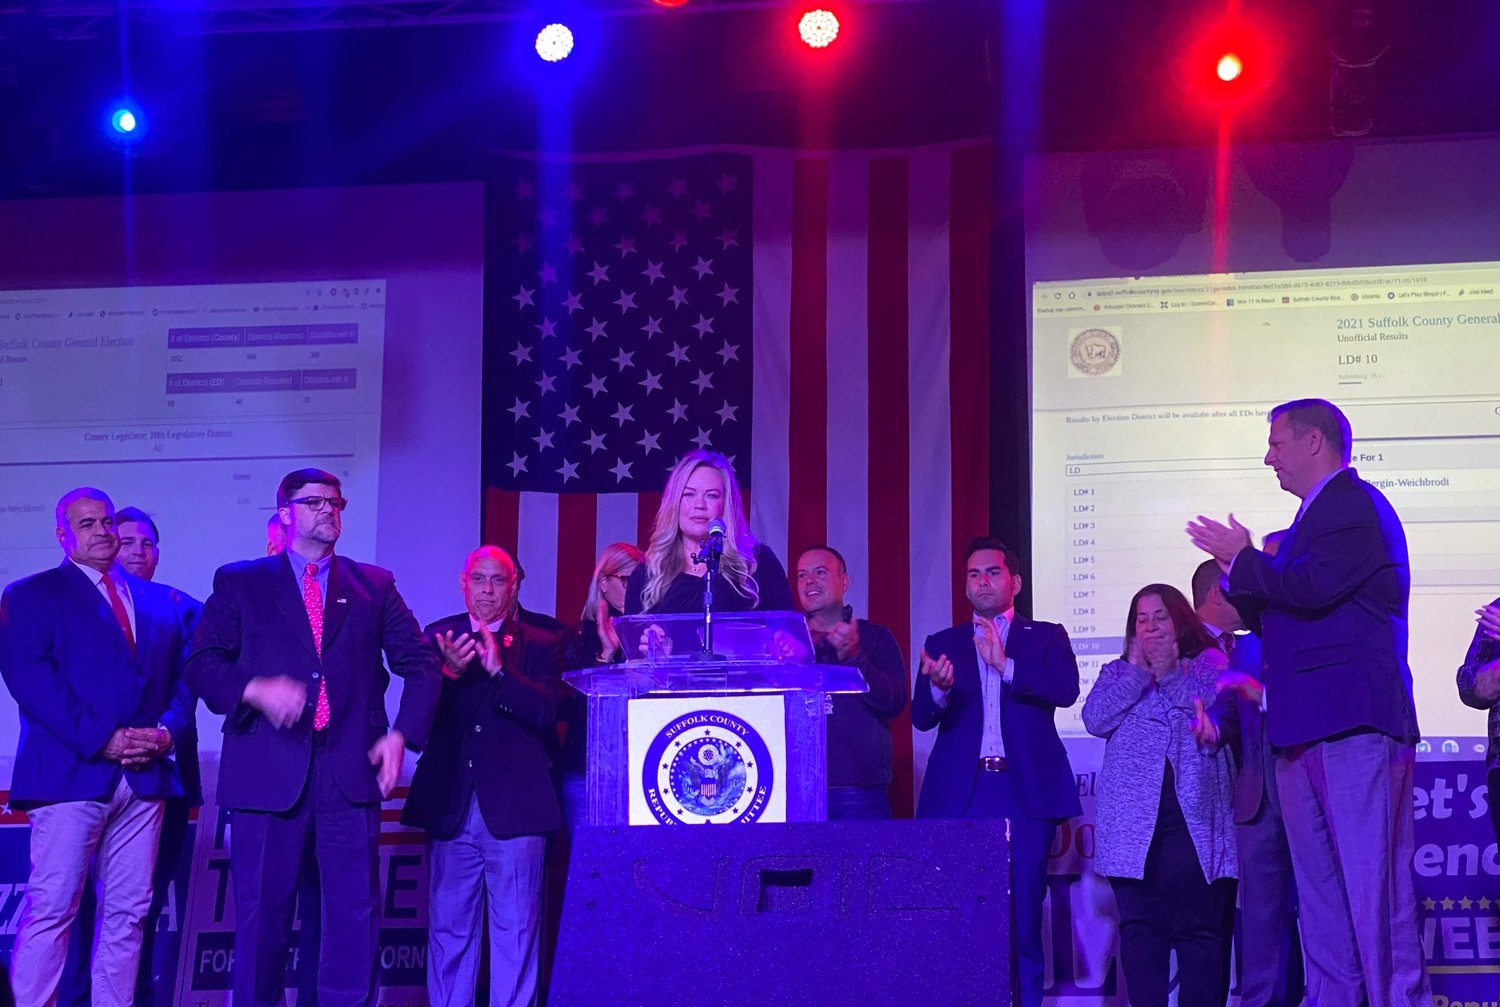 Trish Bergin speaks after her victory was announced for a seat on the Suffolk County Legislature.